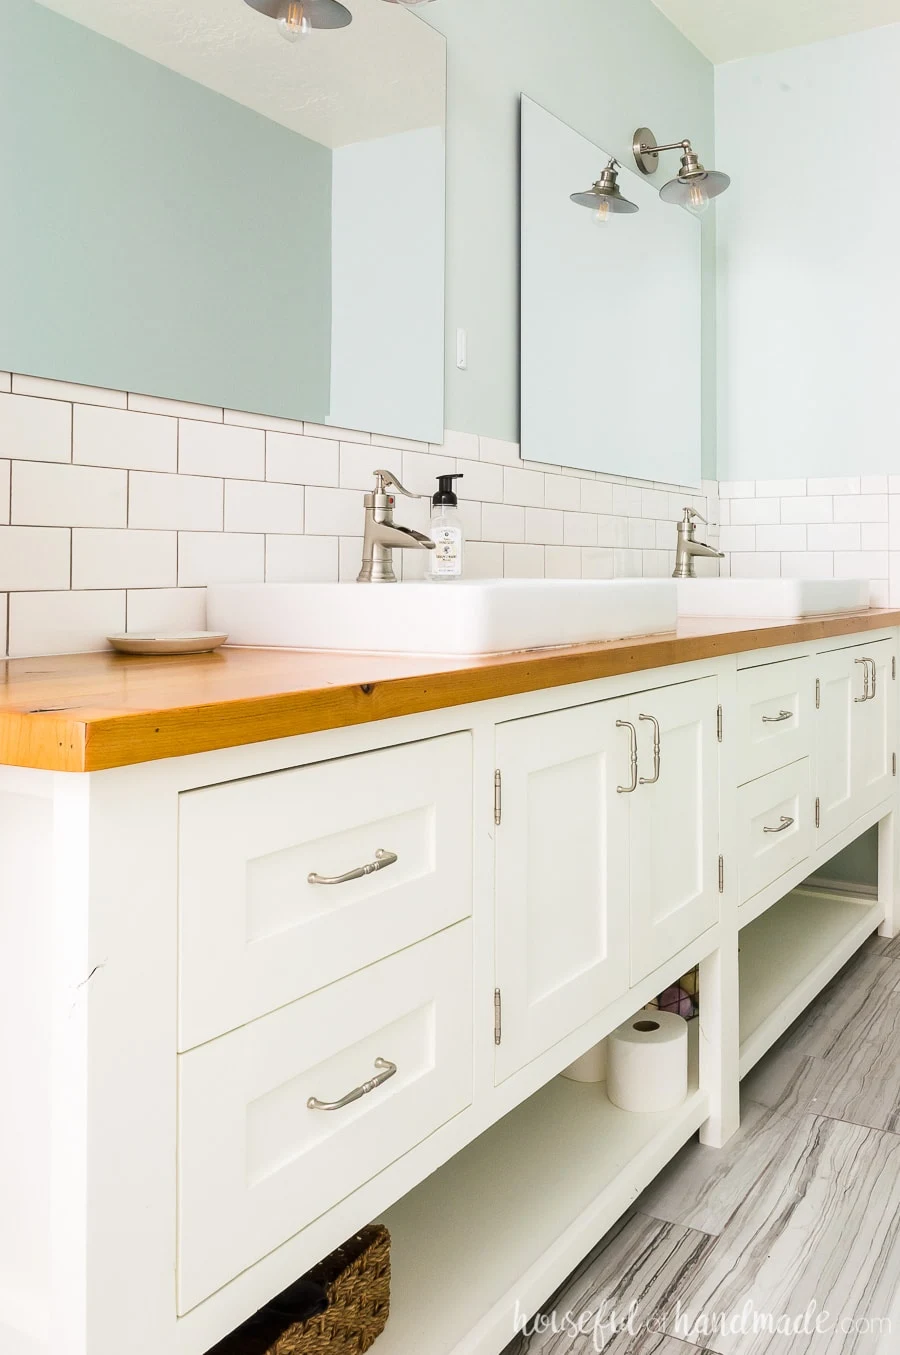 A DIY master bathroom retreat with a large 8' white mission style open shelf bathroom vanity with natural wood vanity top. White square vessel sinks and white subway tile on backsplash. Frameless mirrors against gray-green walls make a peaceful space.